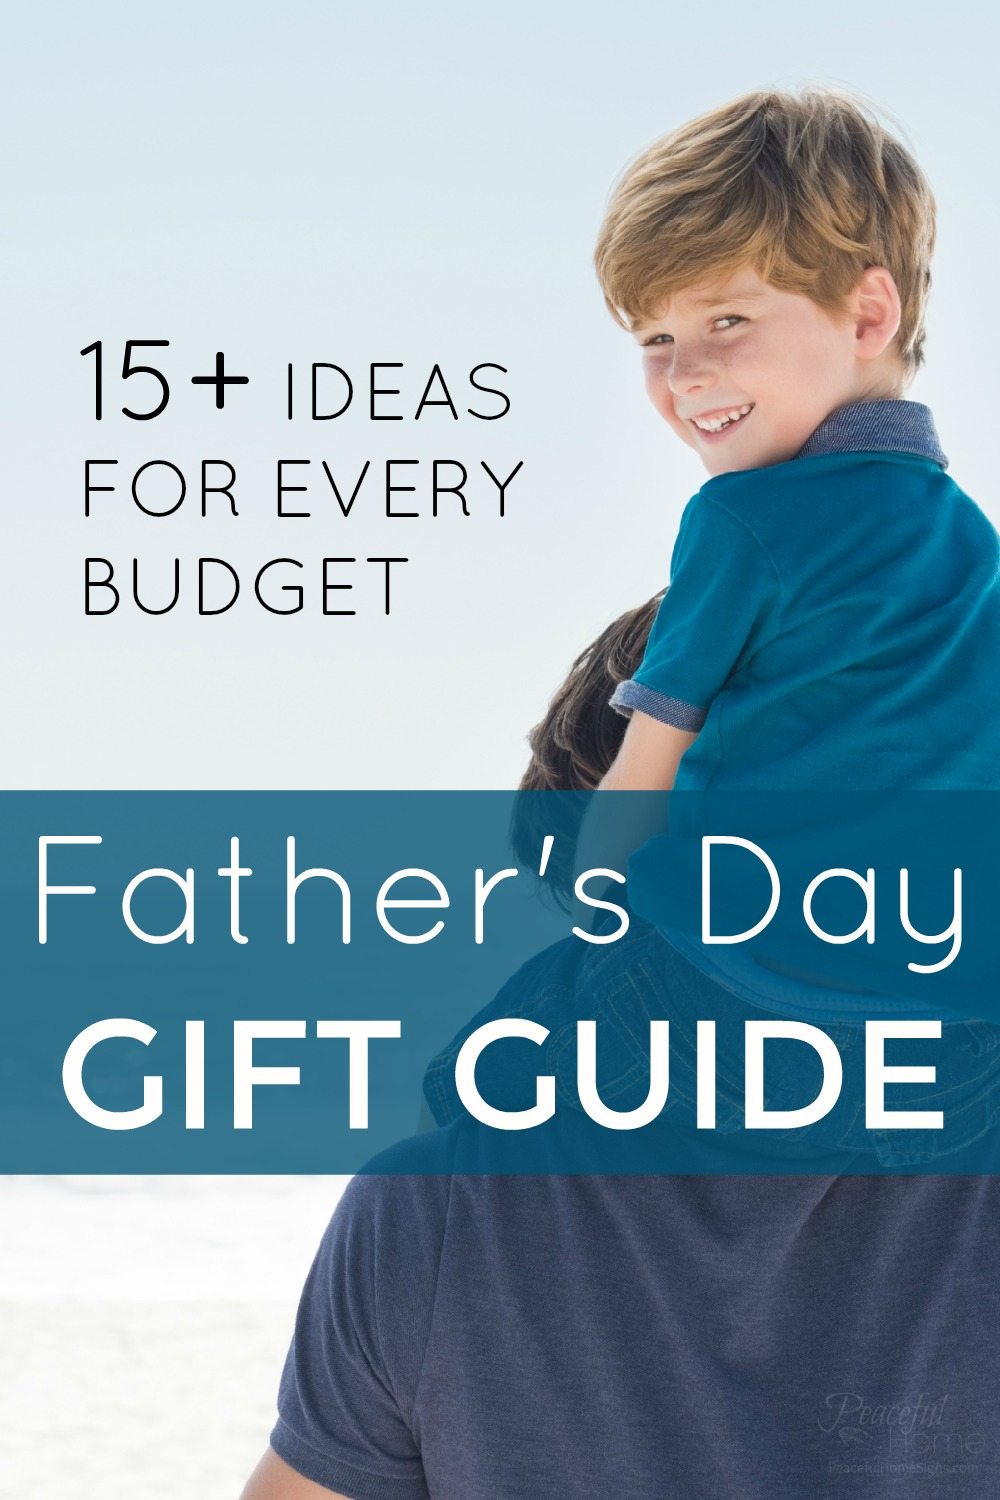 Father's Day Gift Guide | Father's Day 2014 | Gift for Dad | Gift for Uncle | Gift for Husband | Gift for Grandpa | DIY Father's Day Gift | Gift for Him | Father's Day Gift Ideas | When is Fathers Day